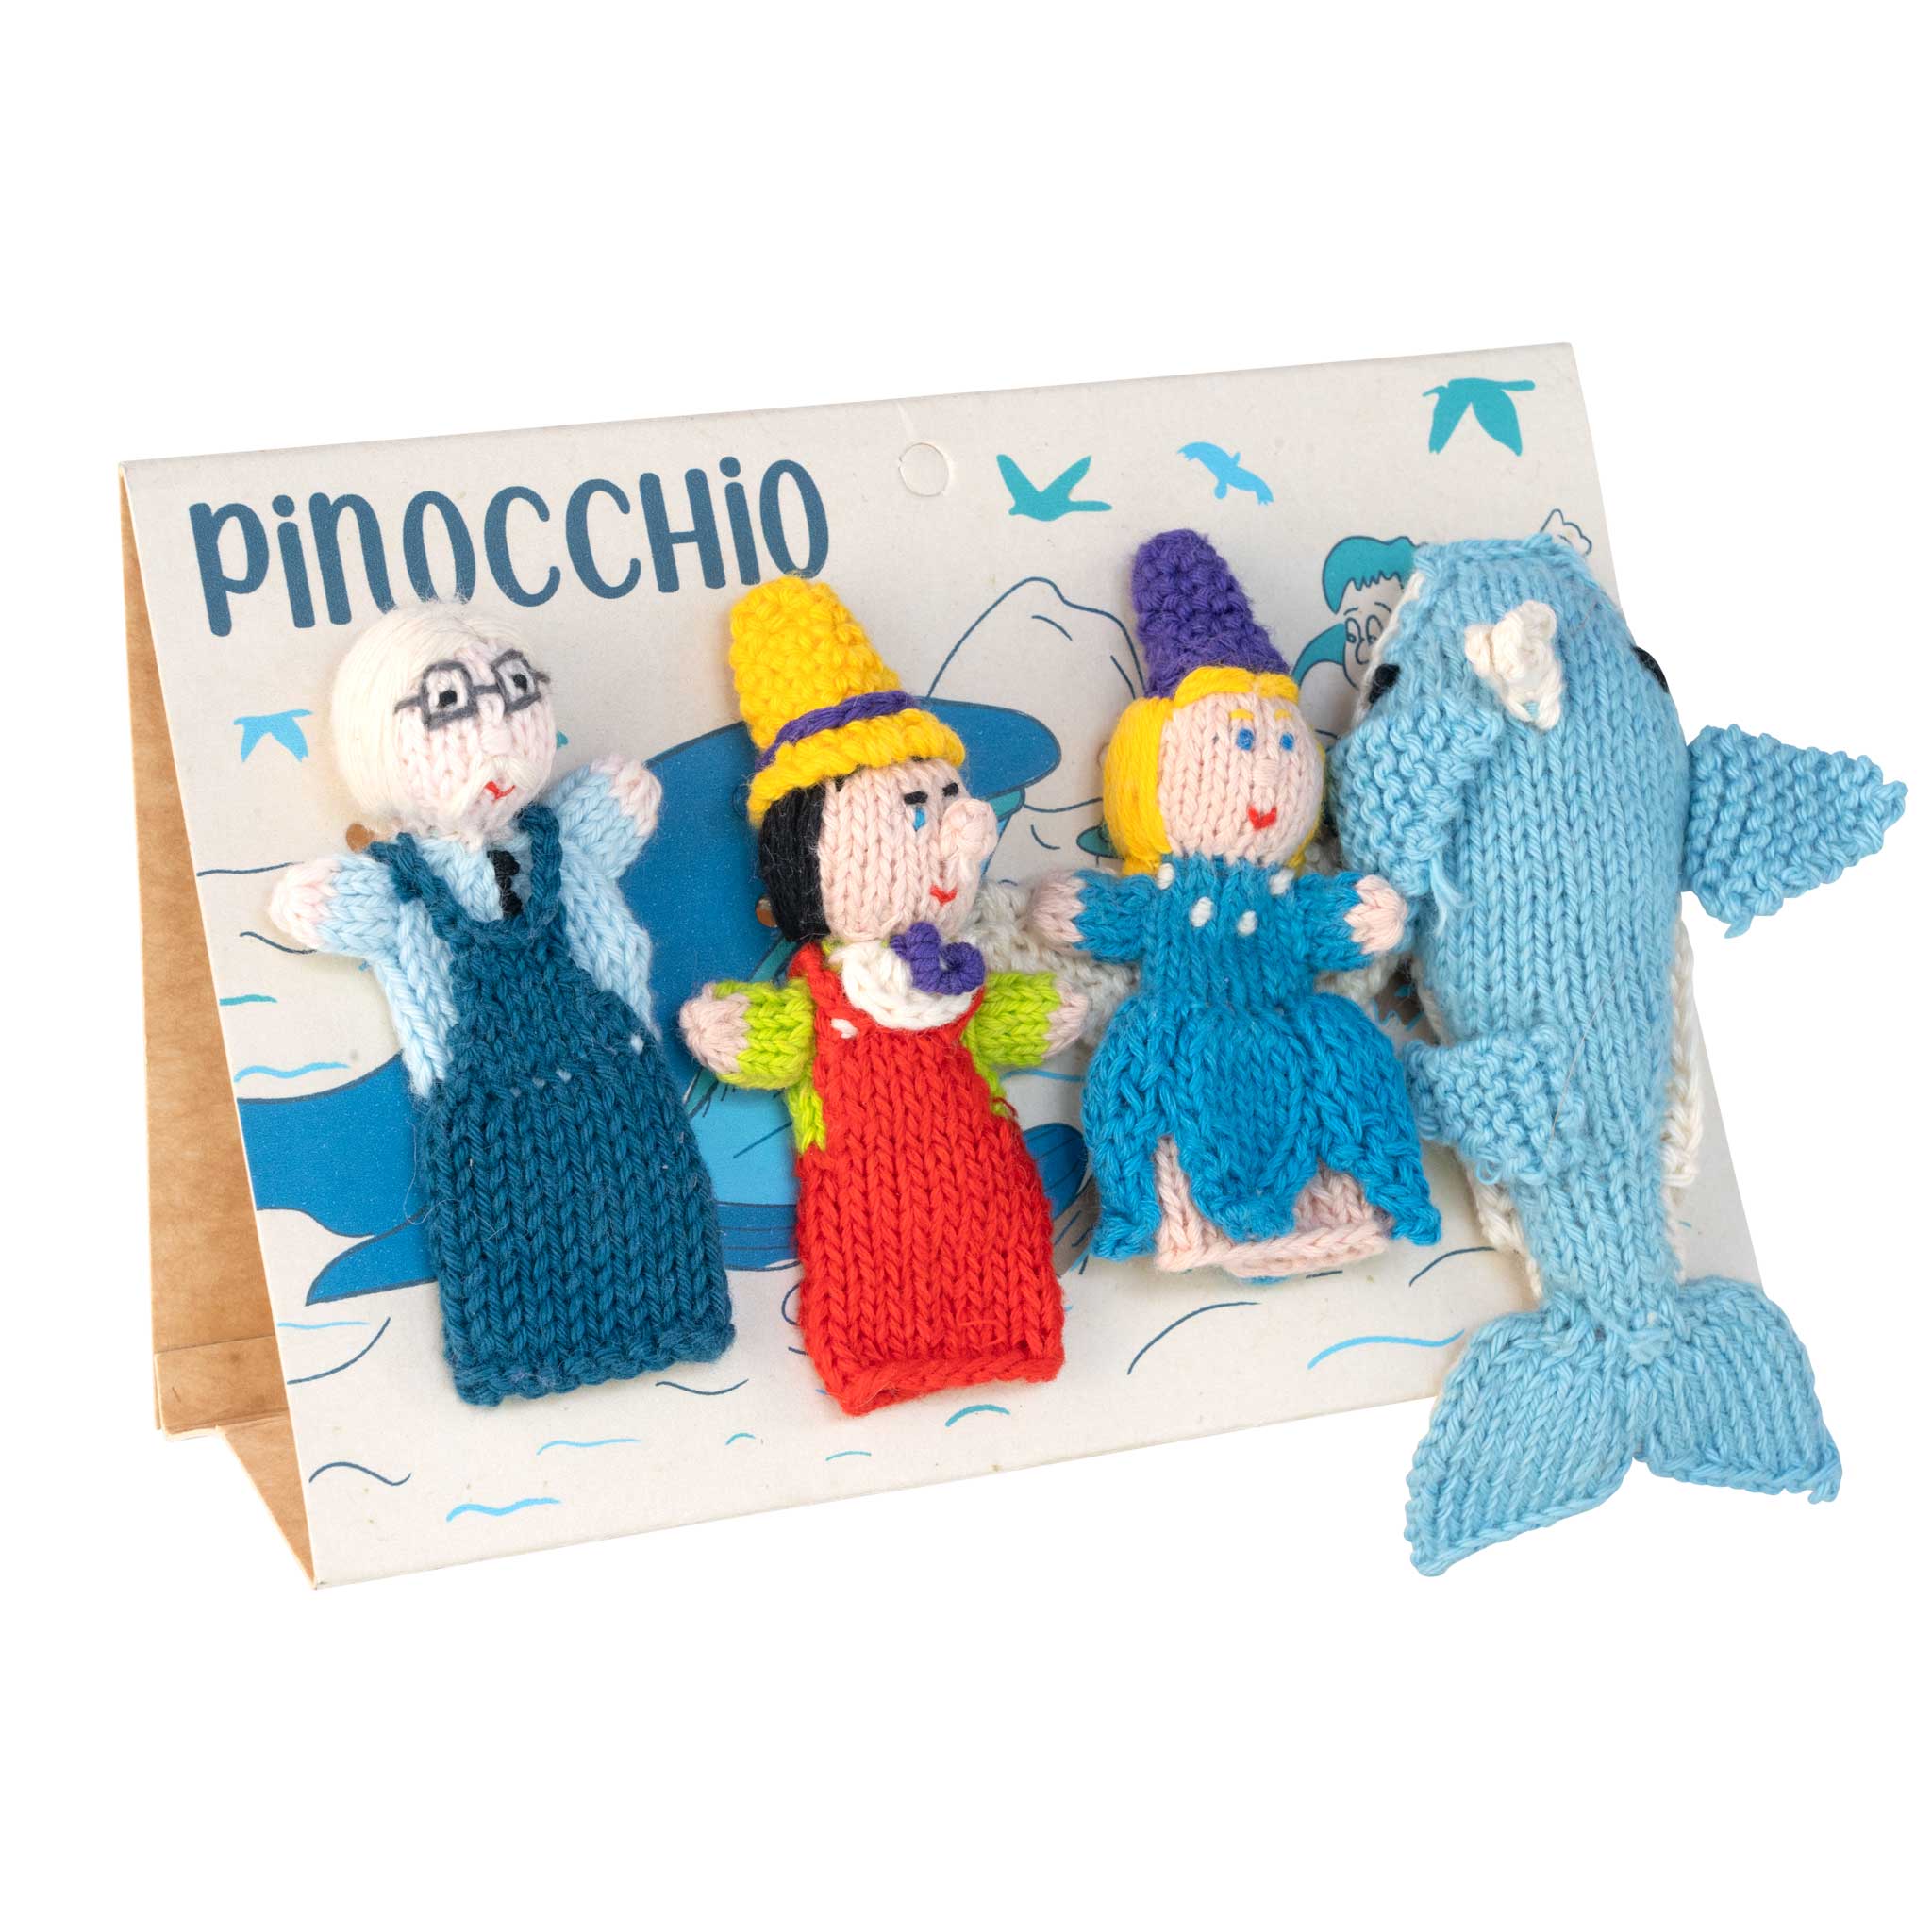 Pinocchio Story Pack of 4 - Organic Cotton Finger Puppets